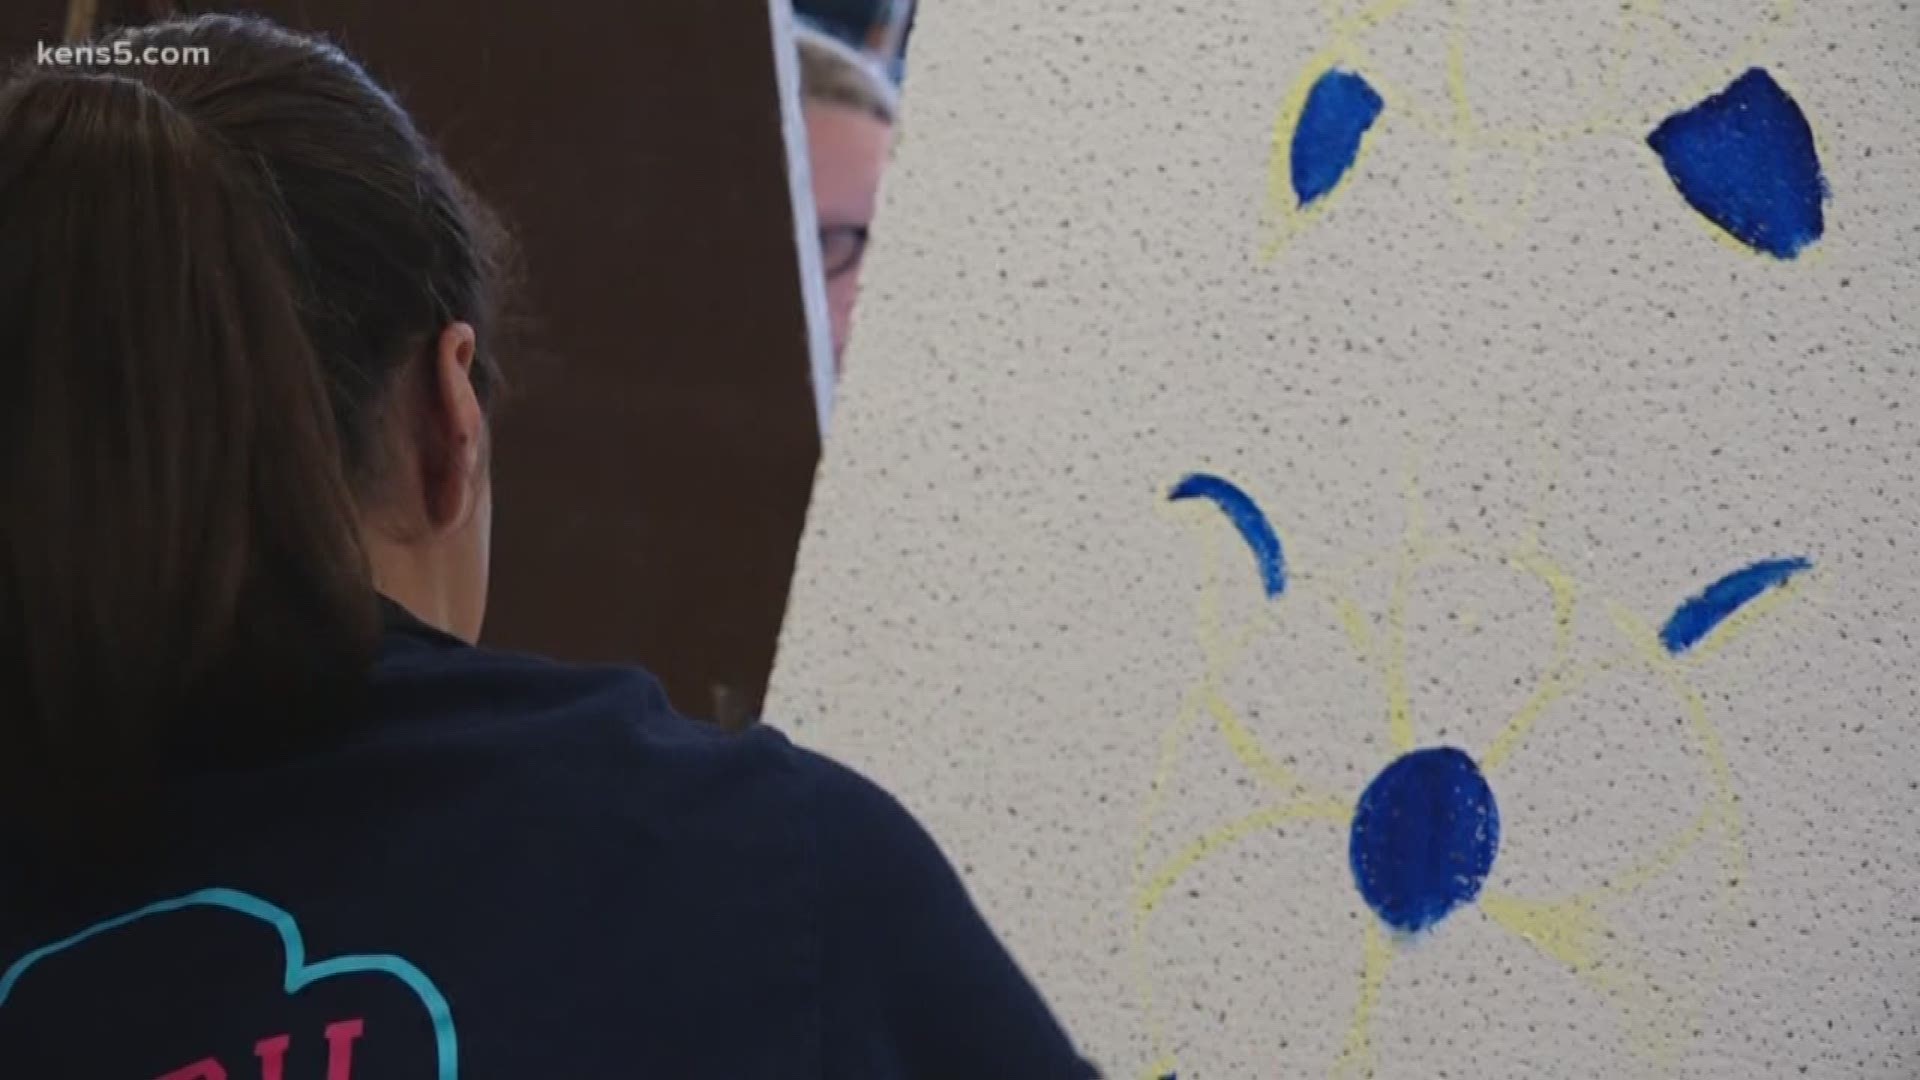 A local Girl Scout troop is painting ceiling tiles at a San Antonio hospital to help bring smiles to sick children in the pediatric unit. Eyewitness News reporter Sharon Ko has the story.